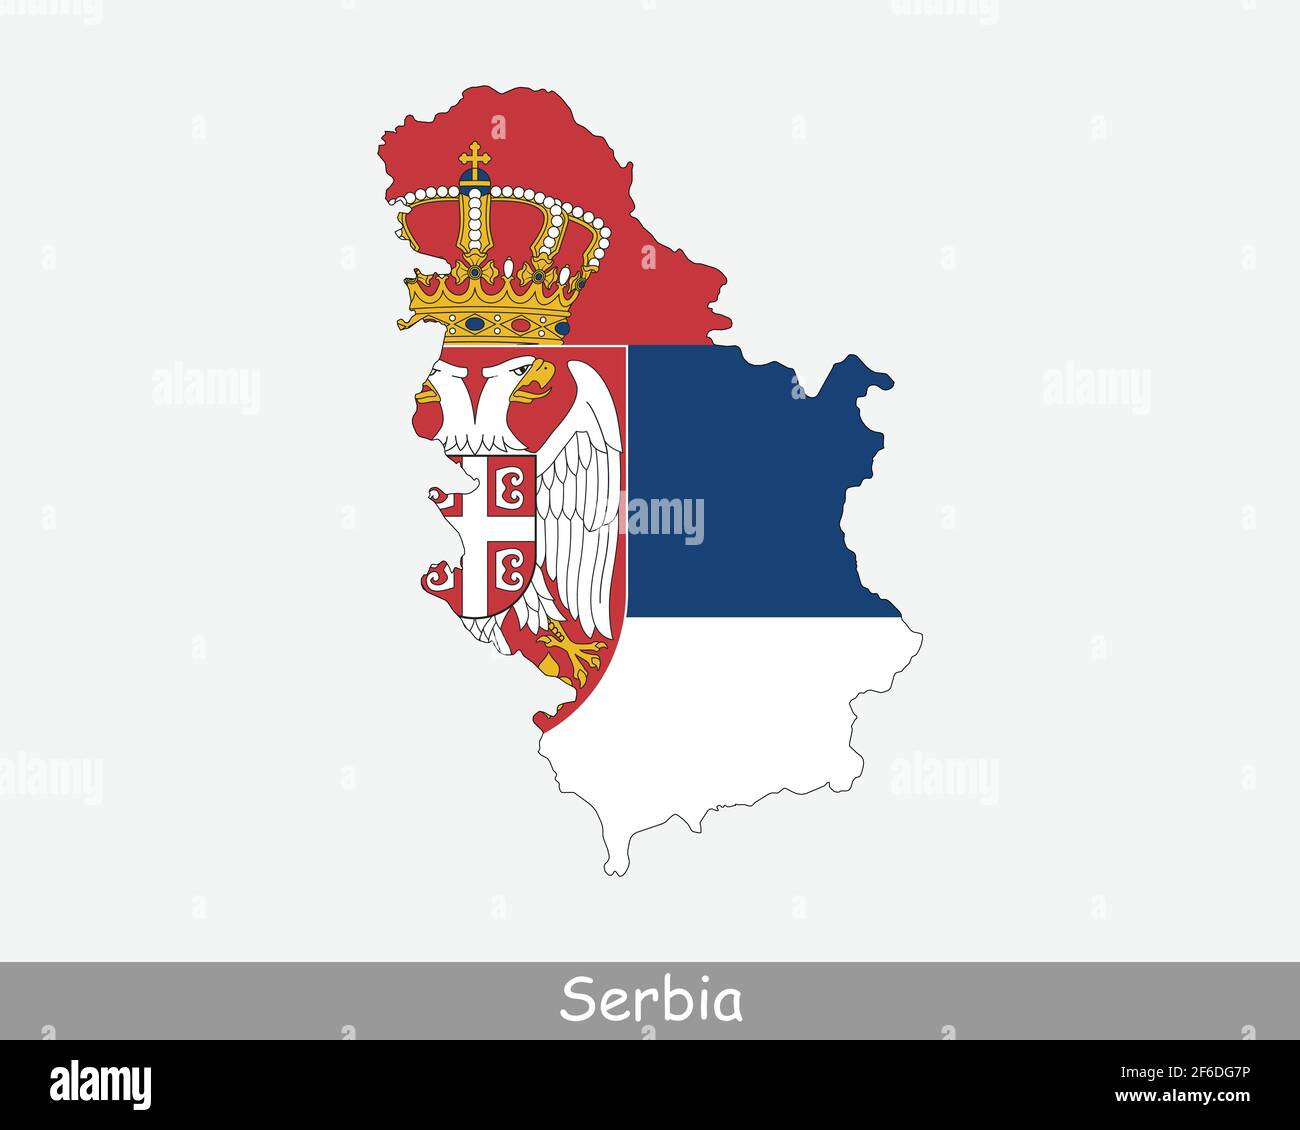 Serbia Flag Map. Map of the Republic of Serbia with the Serbian national flag isolated on a white background. Vector Illustration. Stock Vector